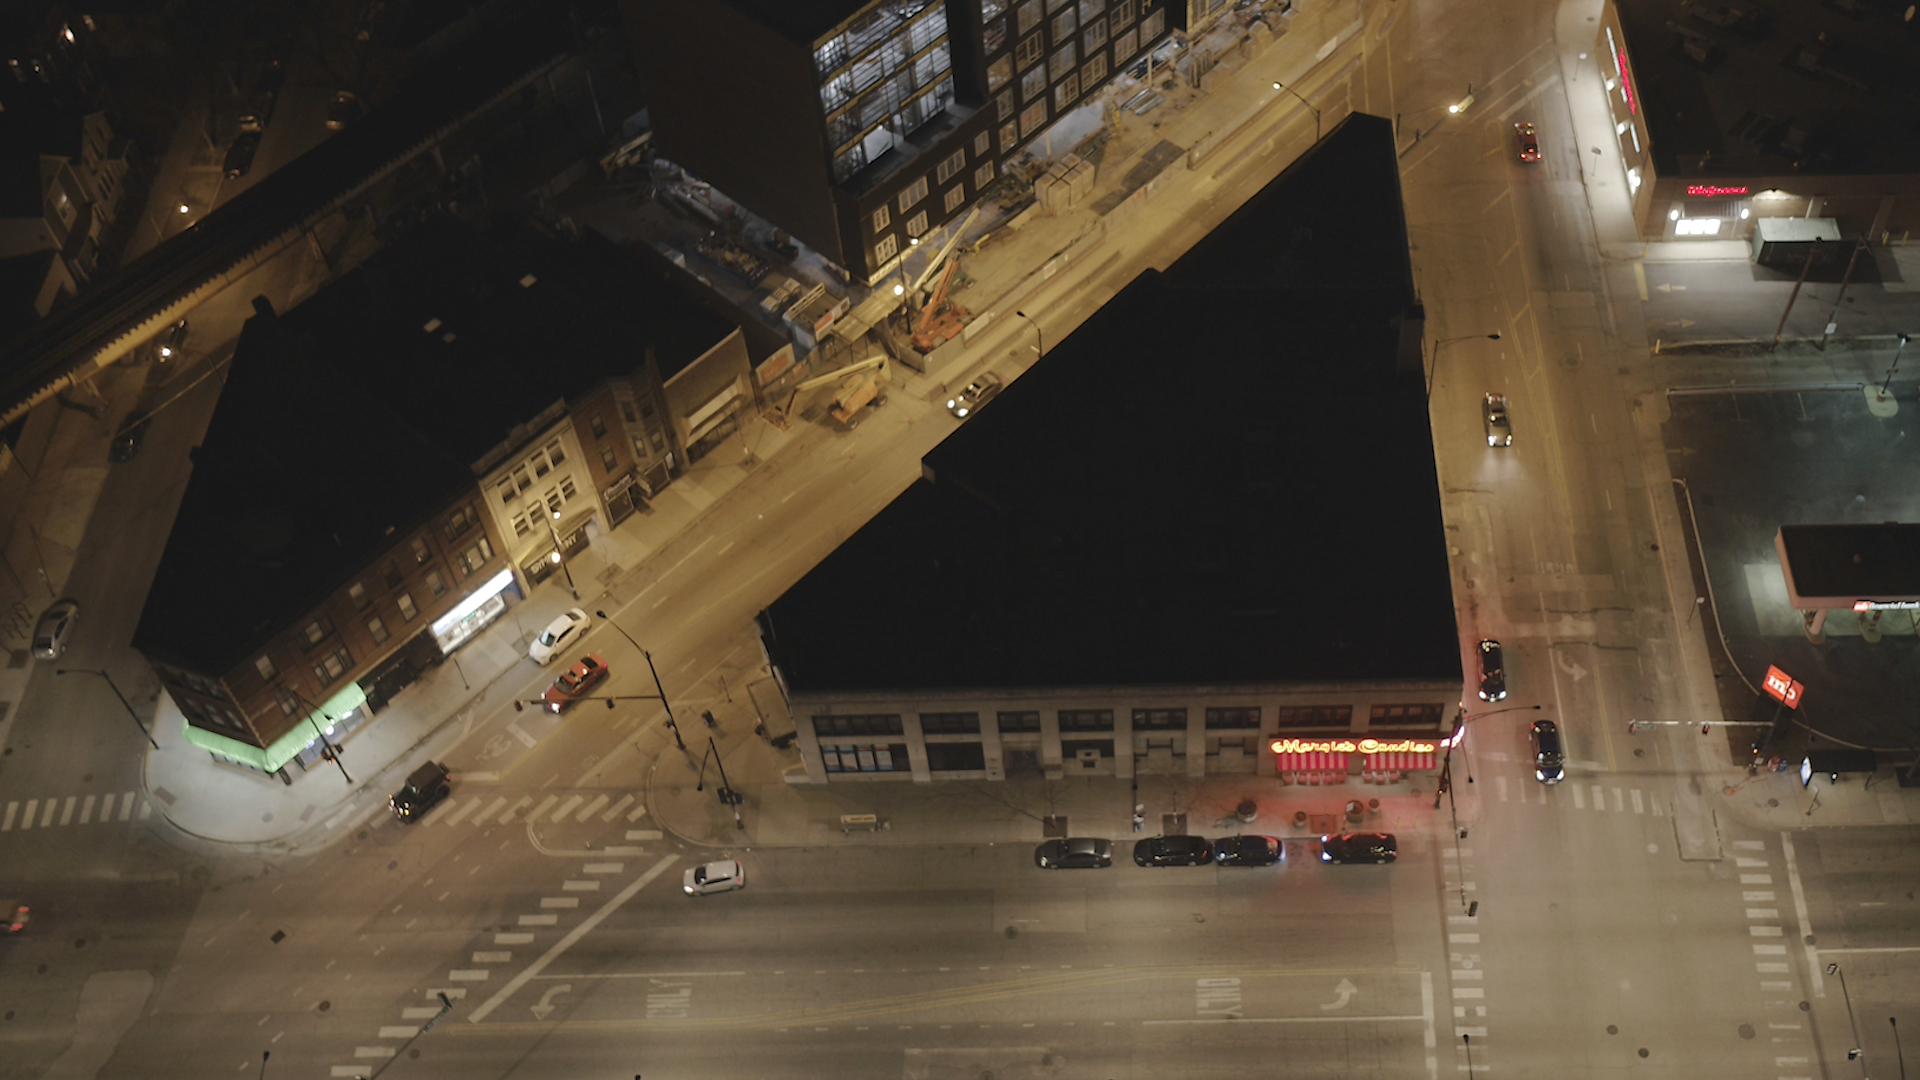 Aerial view of a Chicago city block at night showing improved LED street lighting.